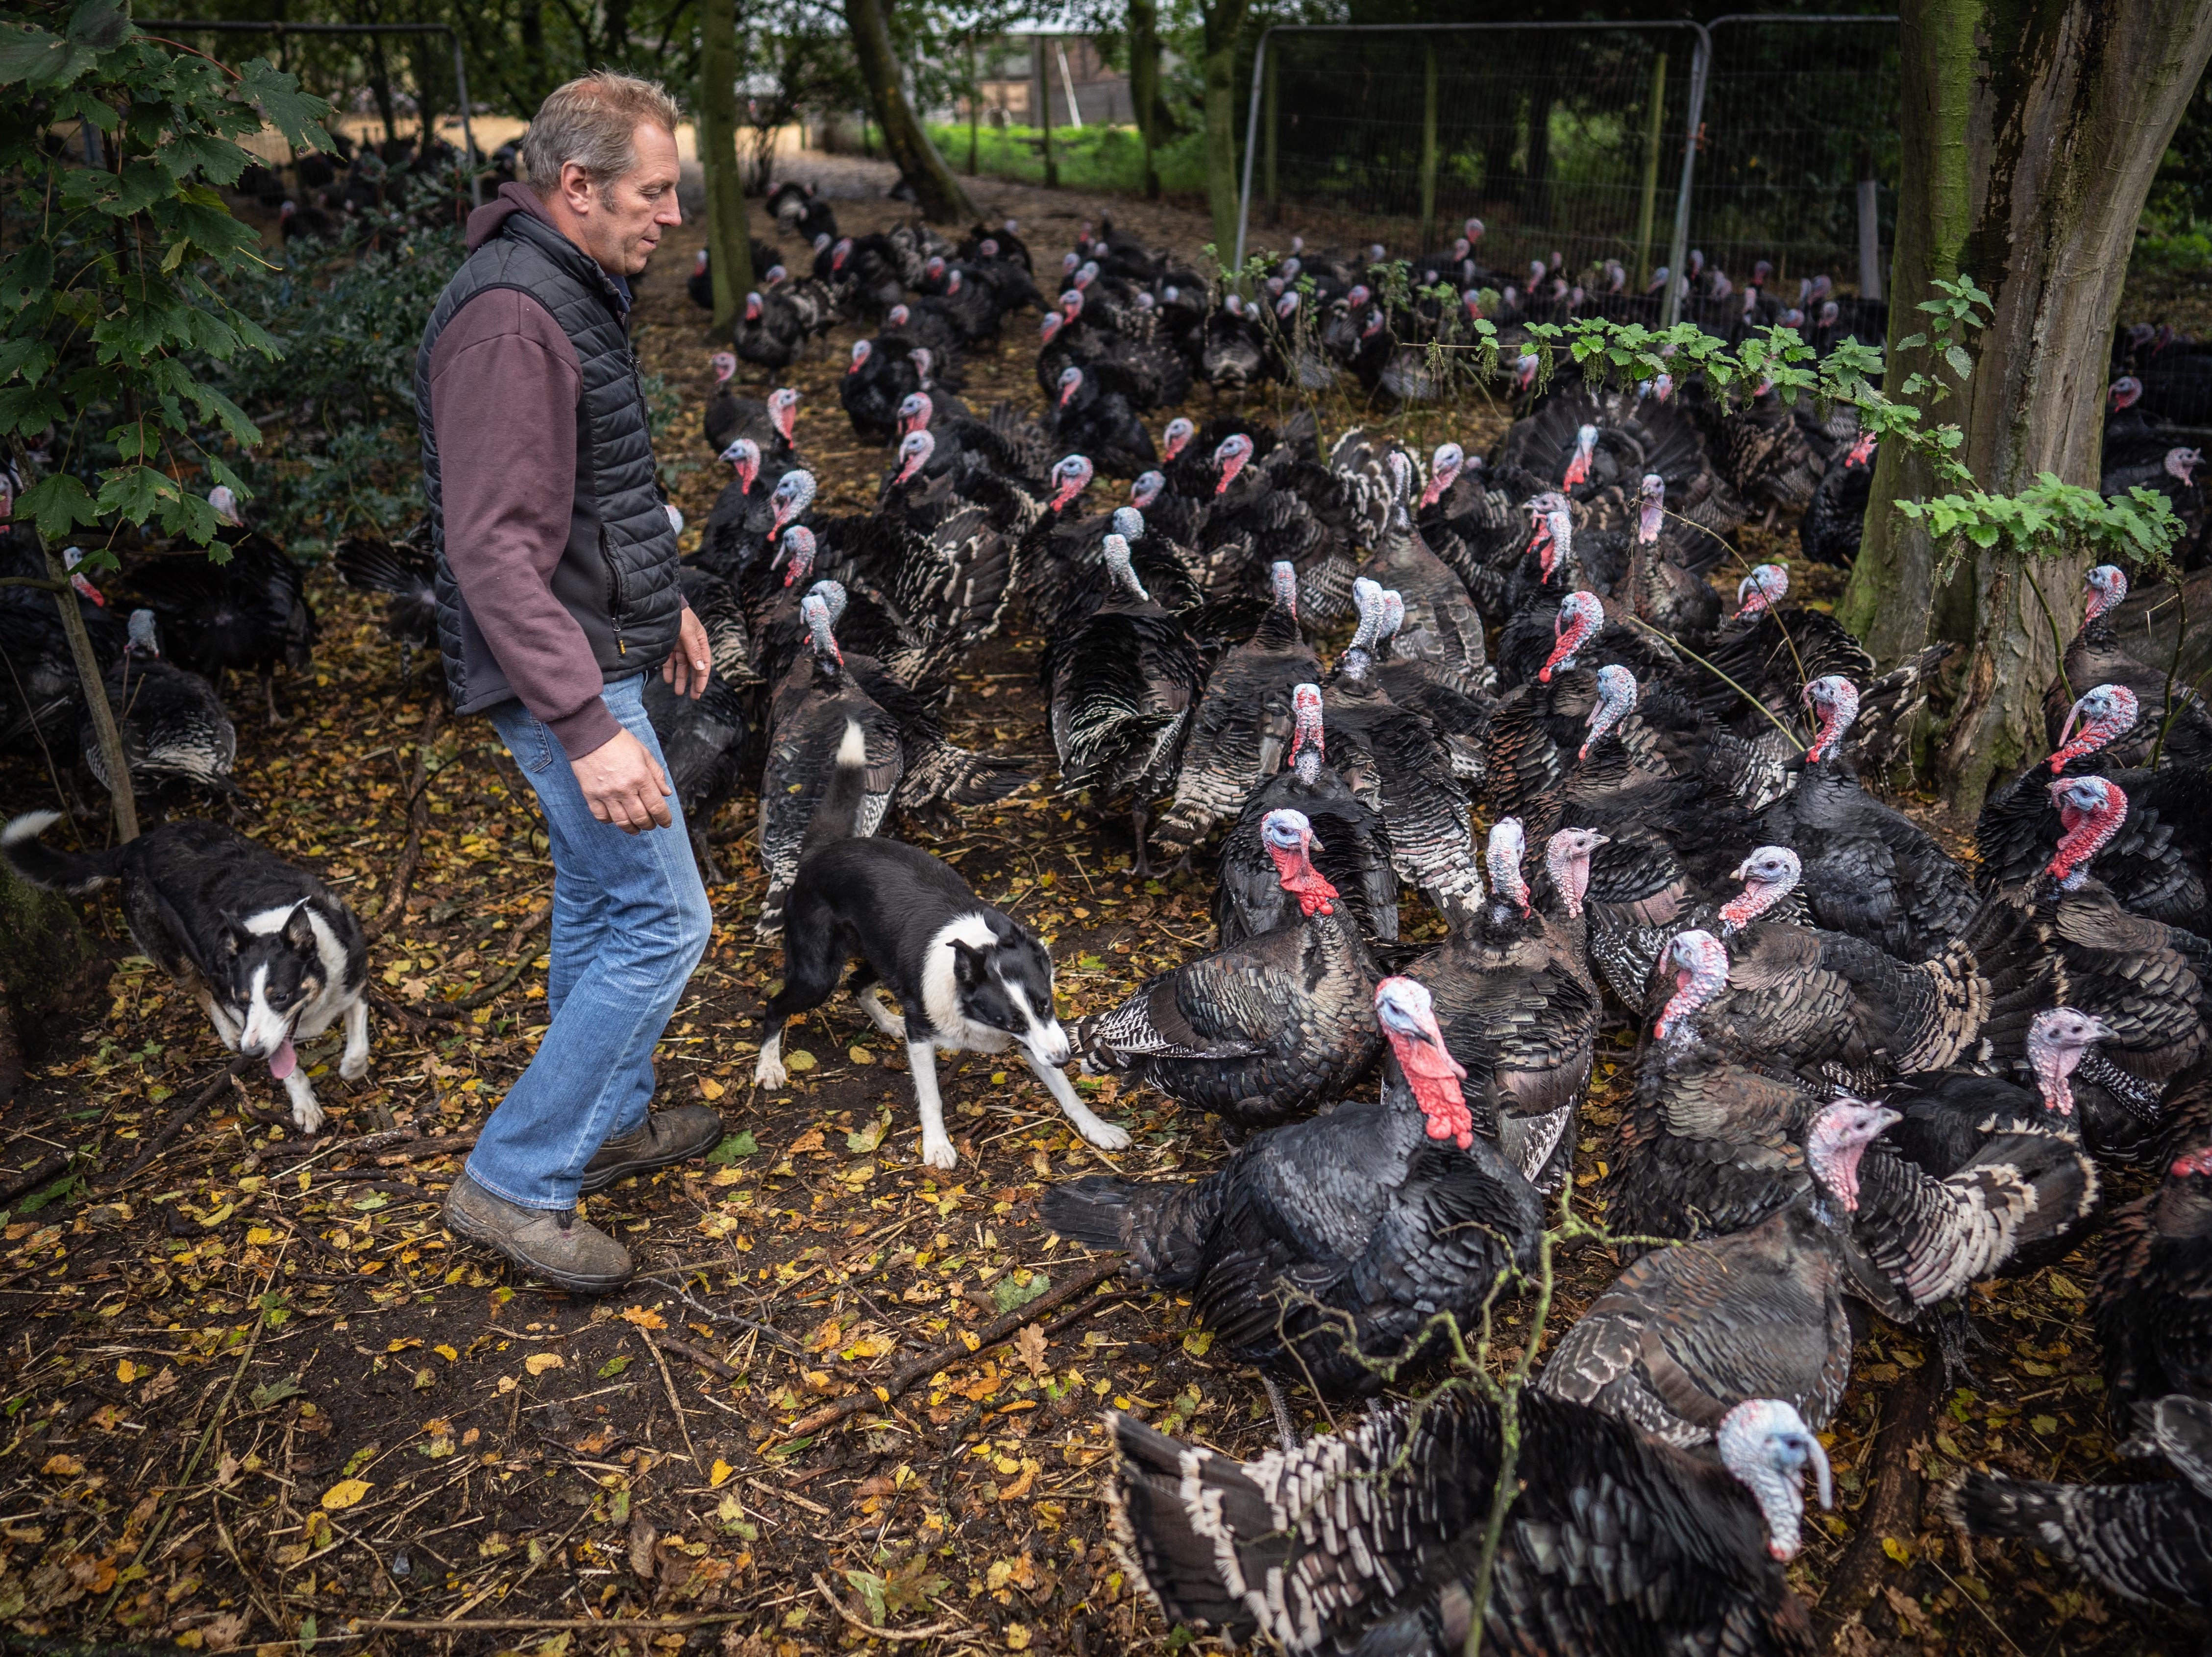 Steve Childerhouse, 51, a turkey farmer in Norfolk, has been forced to cull his entire flock of 10,000 birds